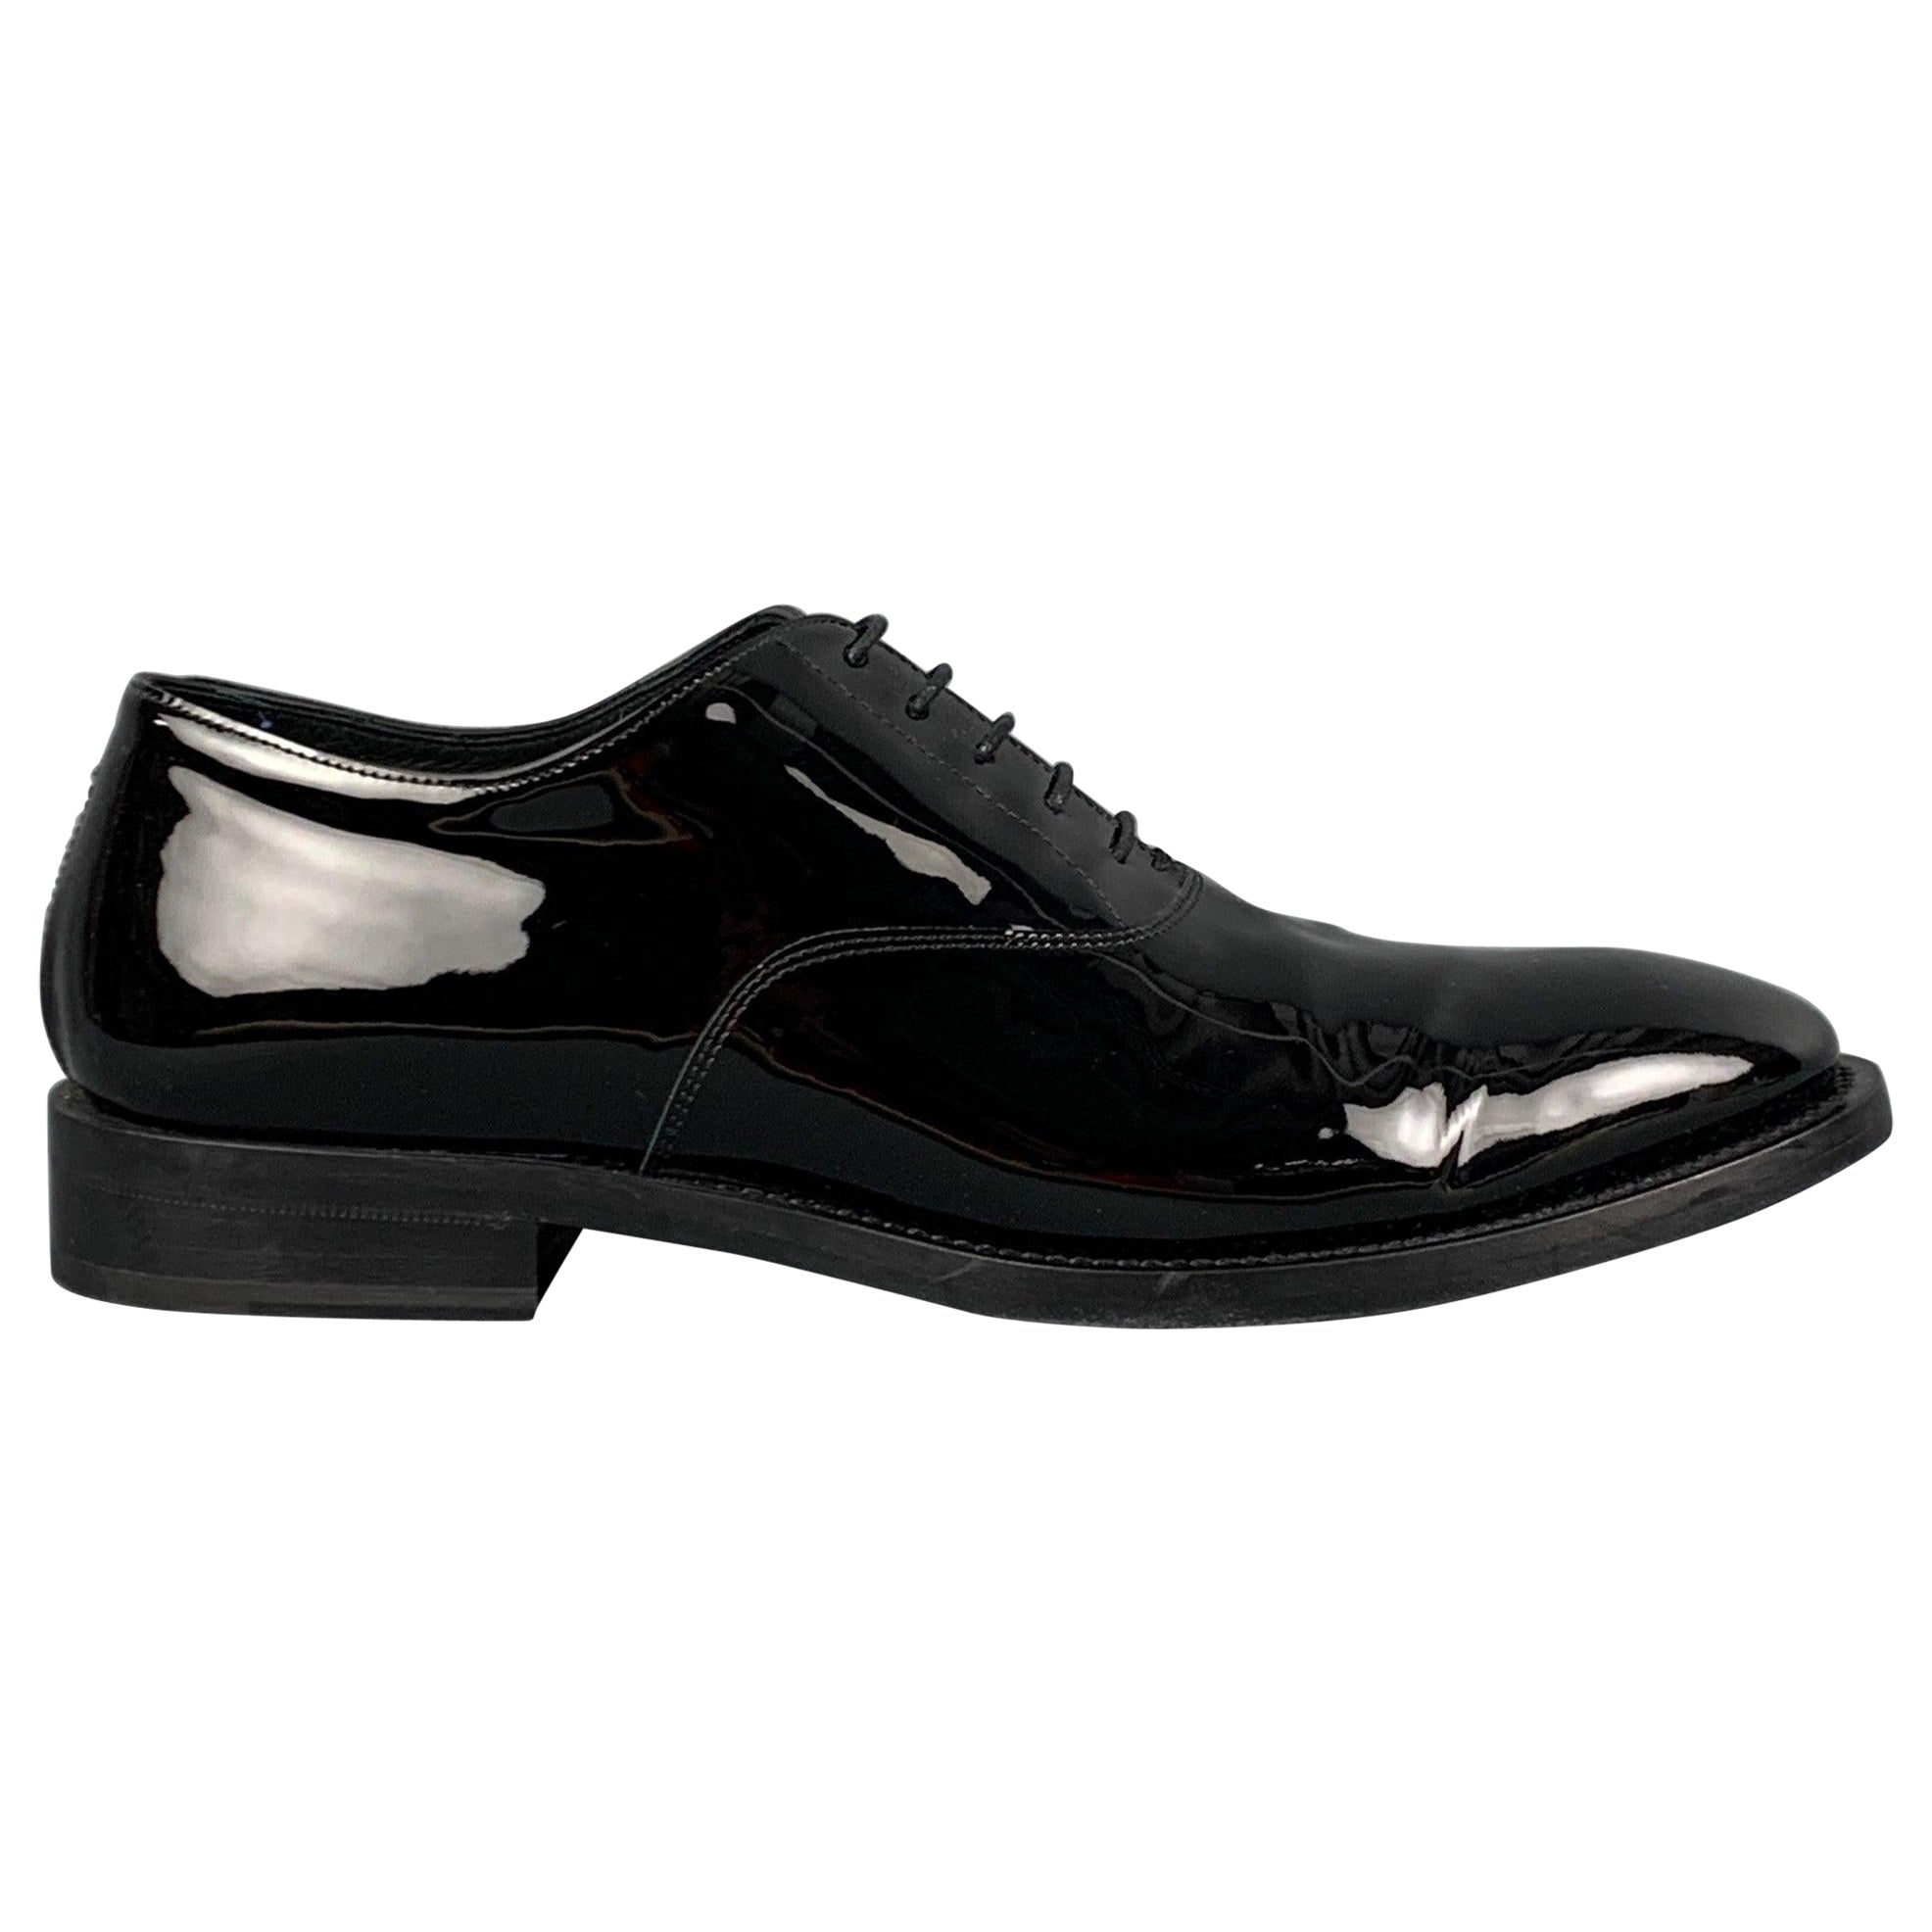 PAUL SMITH Size 10 Black Leather Lace Up Shoes For Sale